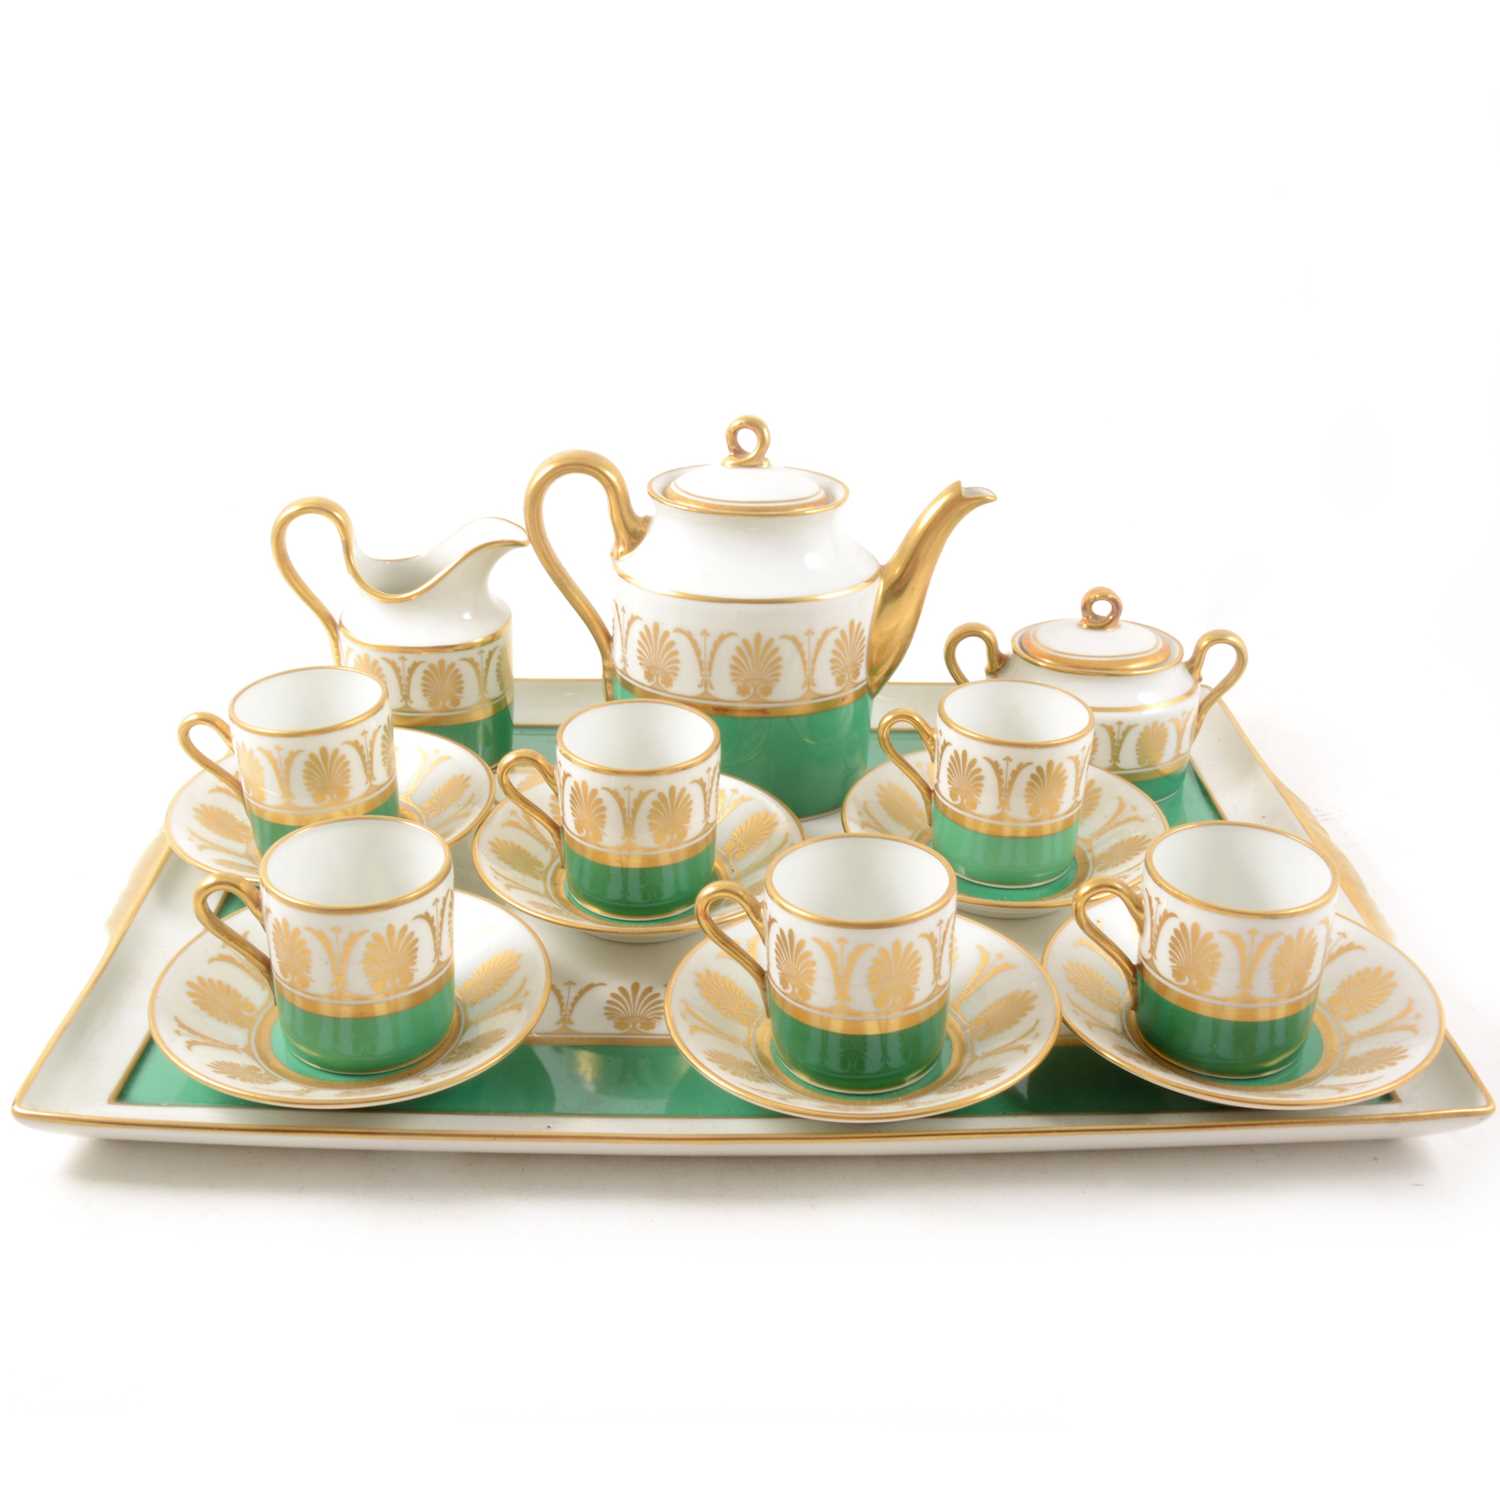 Lot 45 - An Italian porcelain coffee service on a matching tray